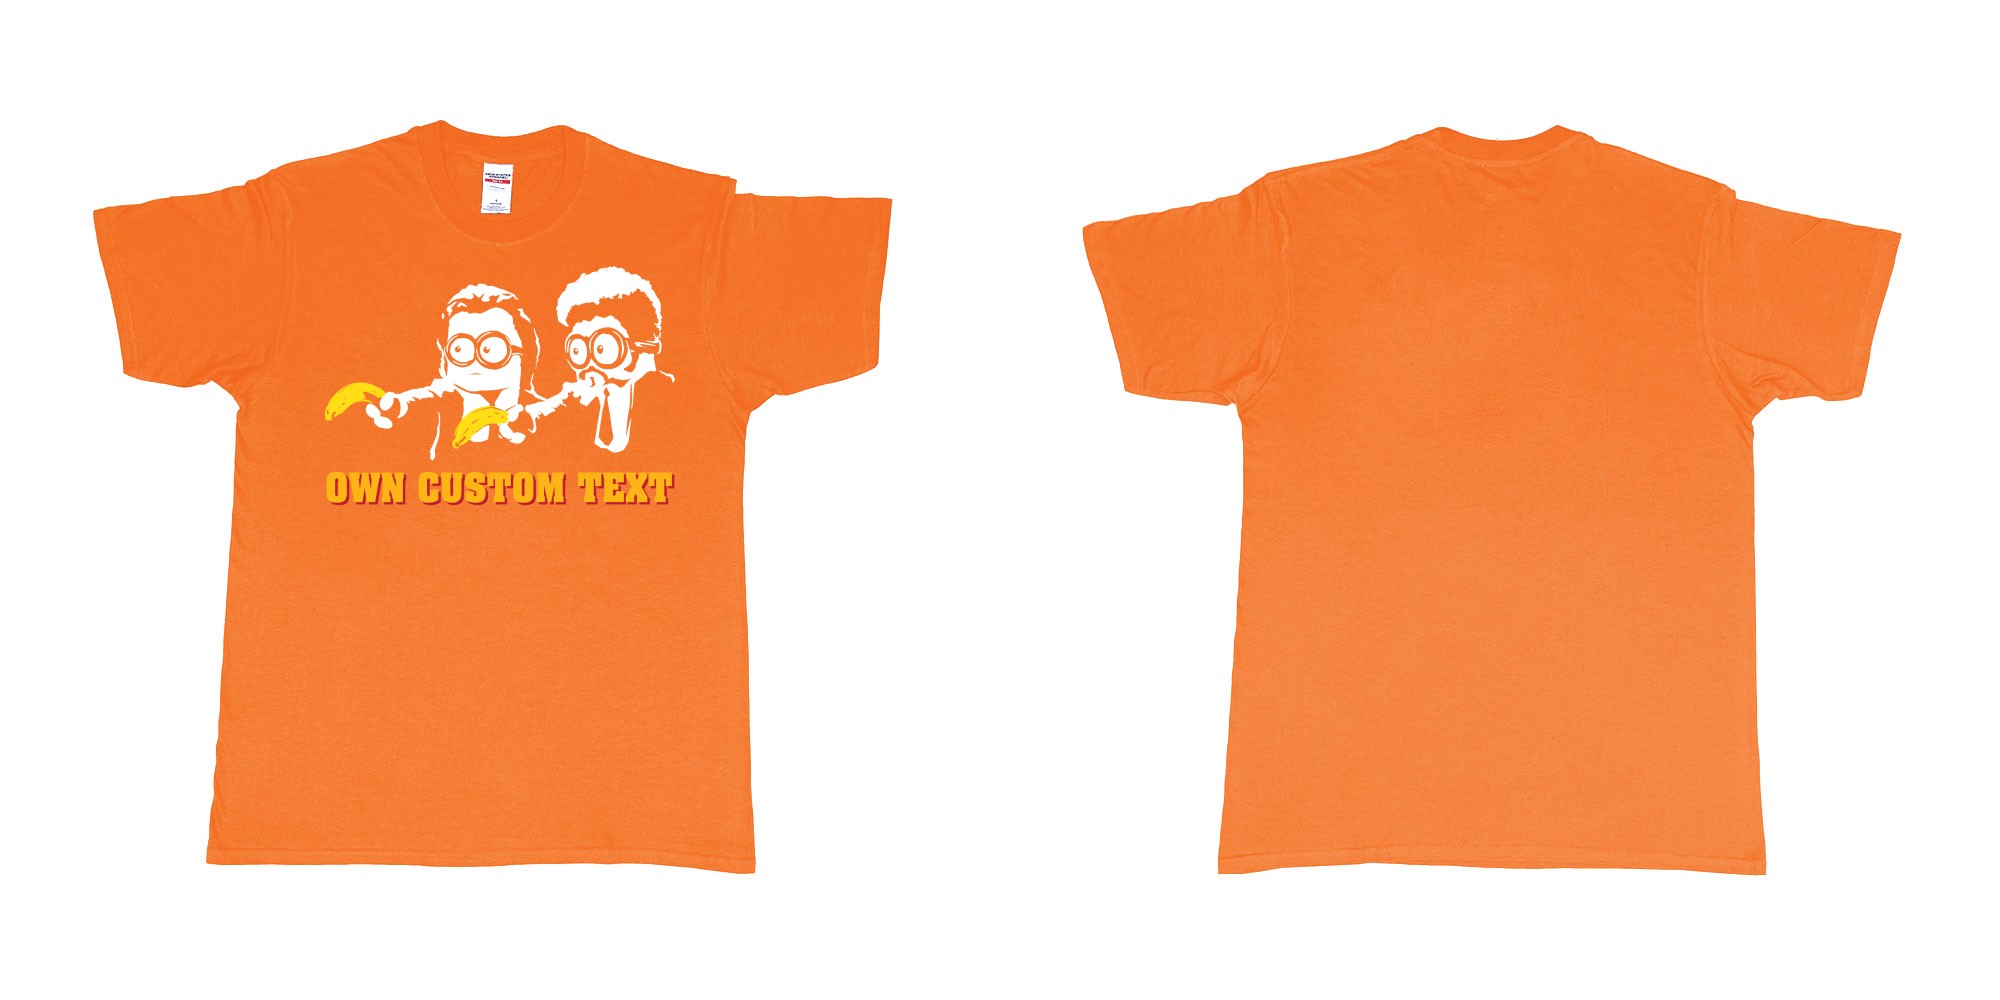 Custom tshirt design minions pulp fiction in fabric color orange choice your own text made in Bali by The Pirate Way